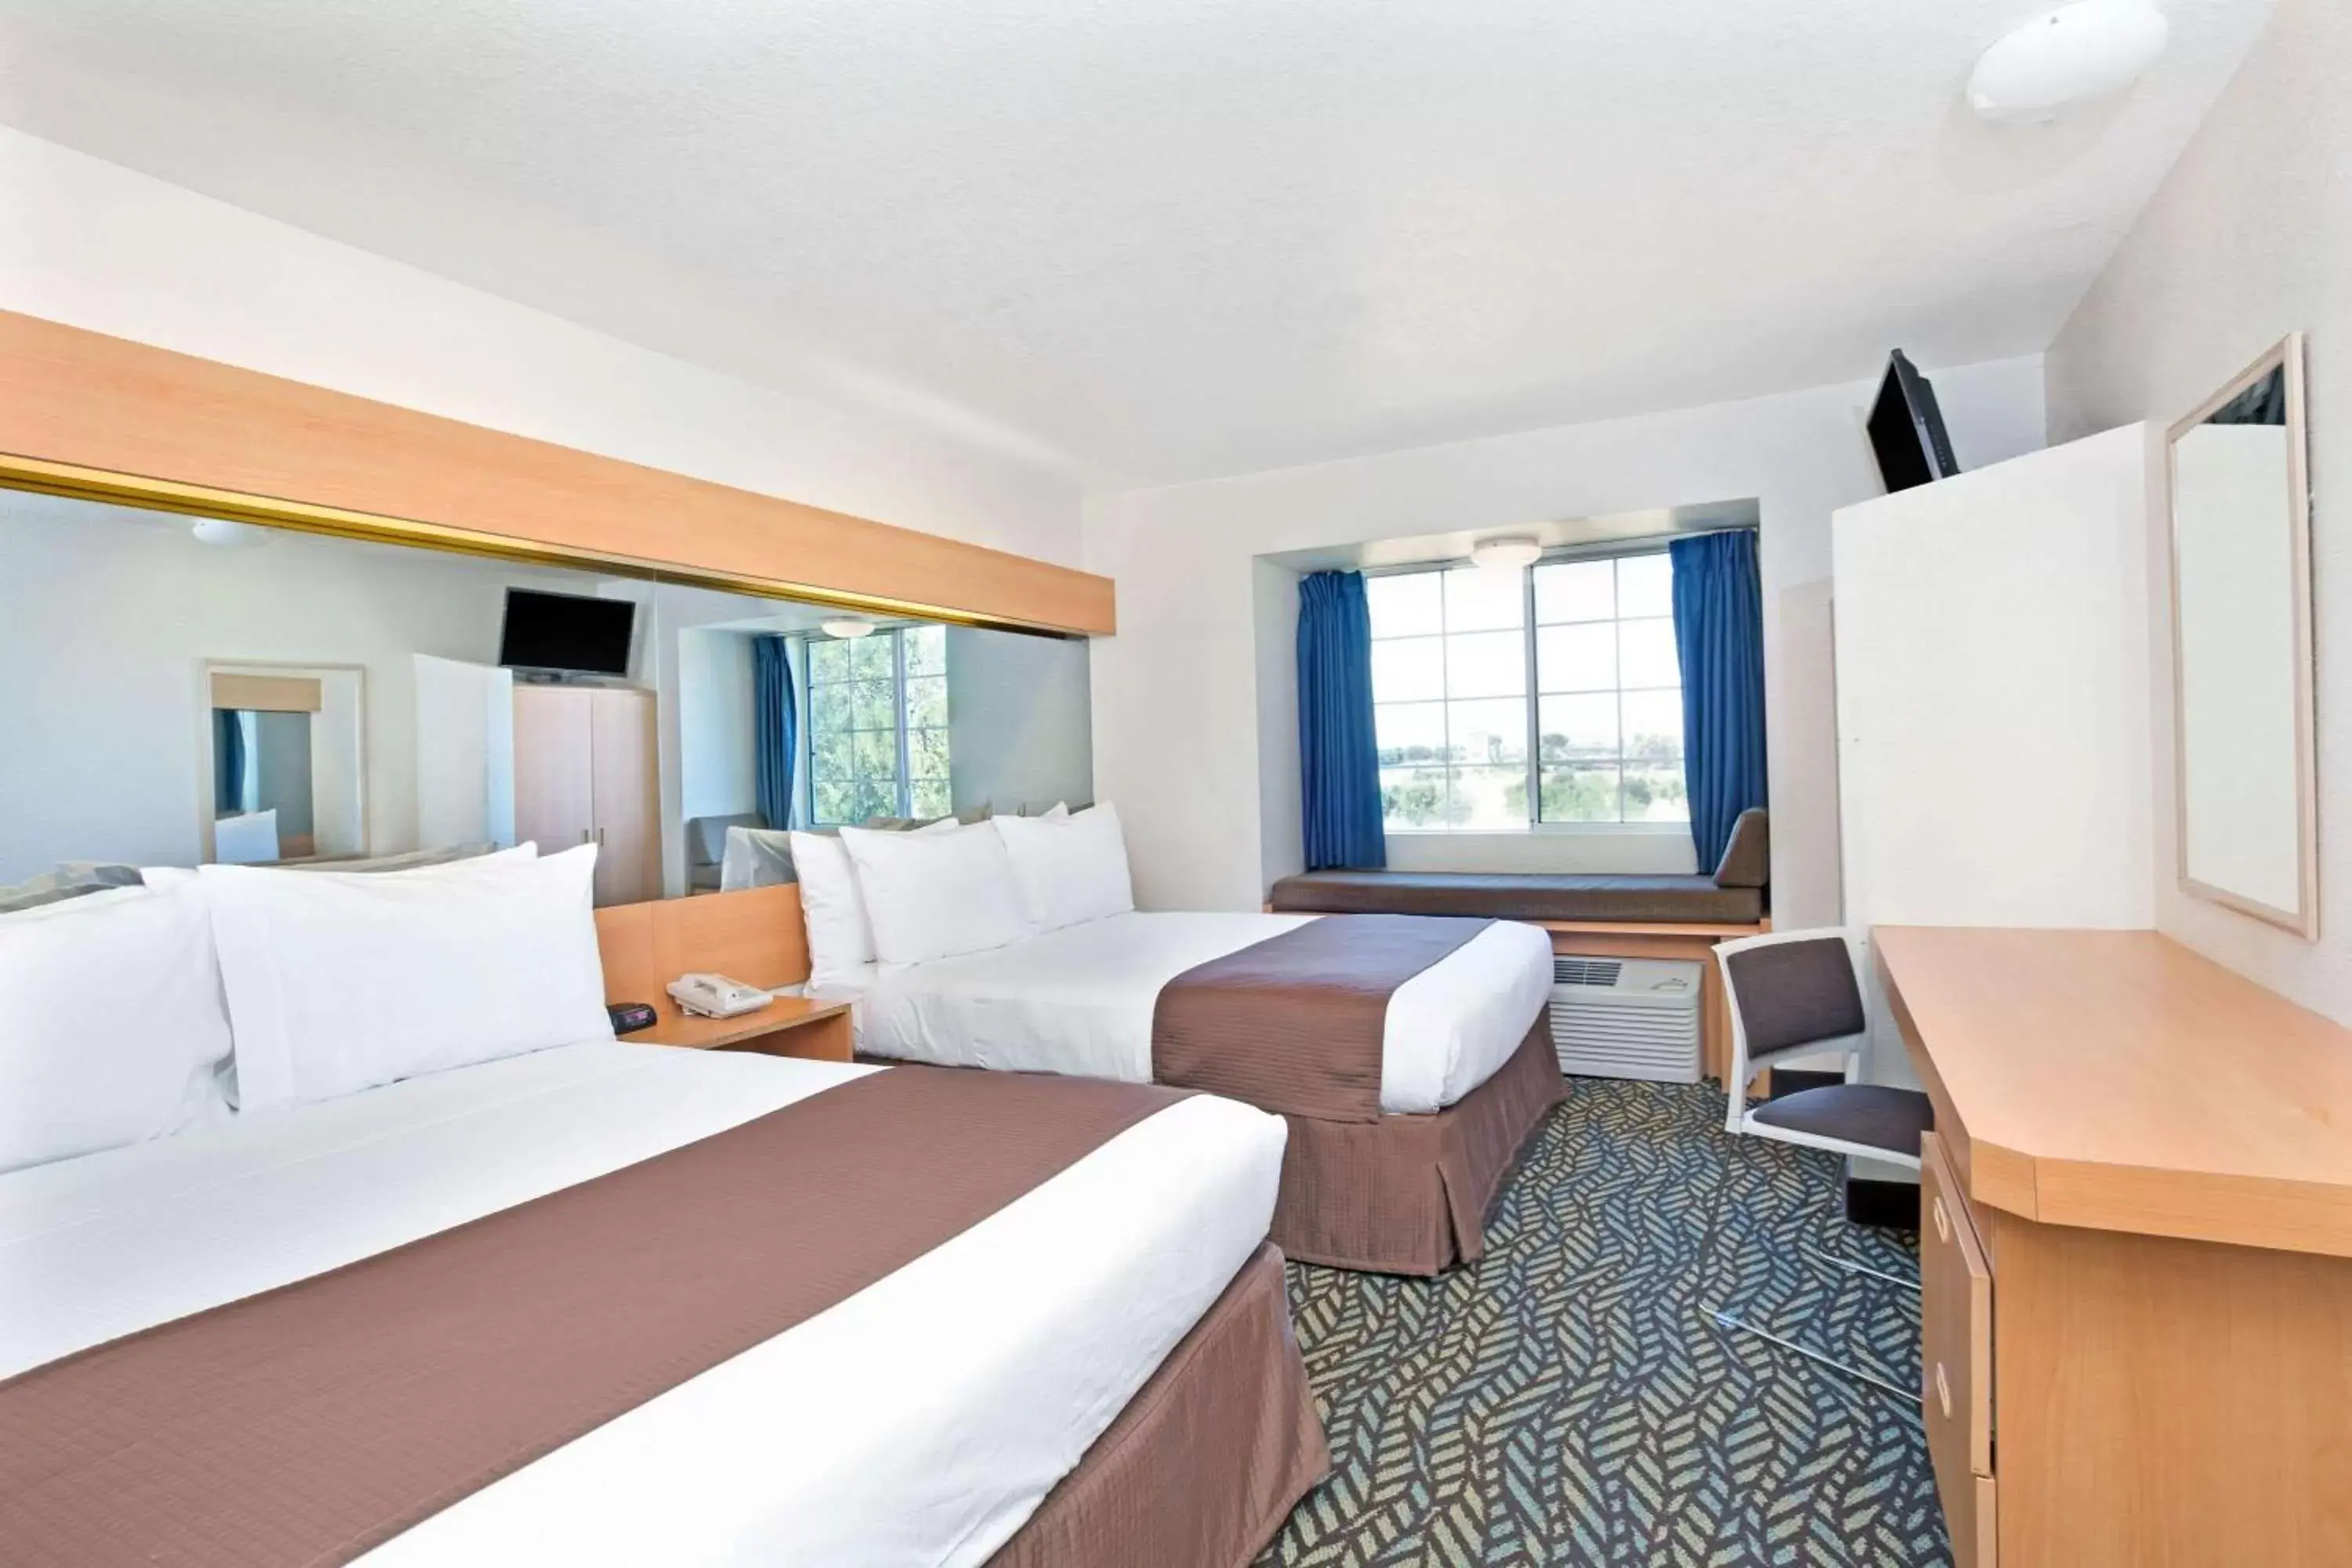 Photo of the whole room in Microtel Inn & Suites, Morgan Hill